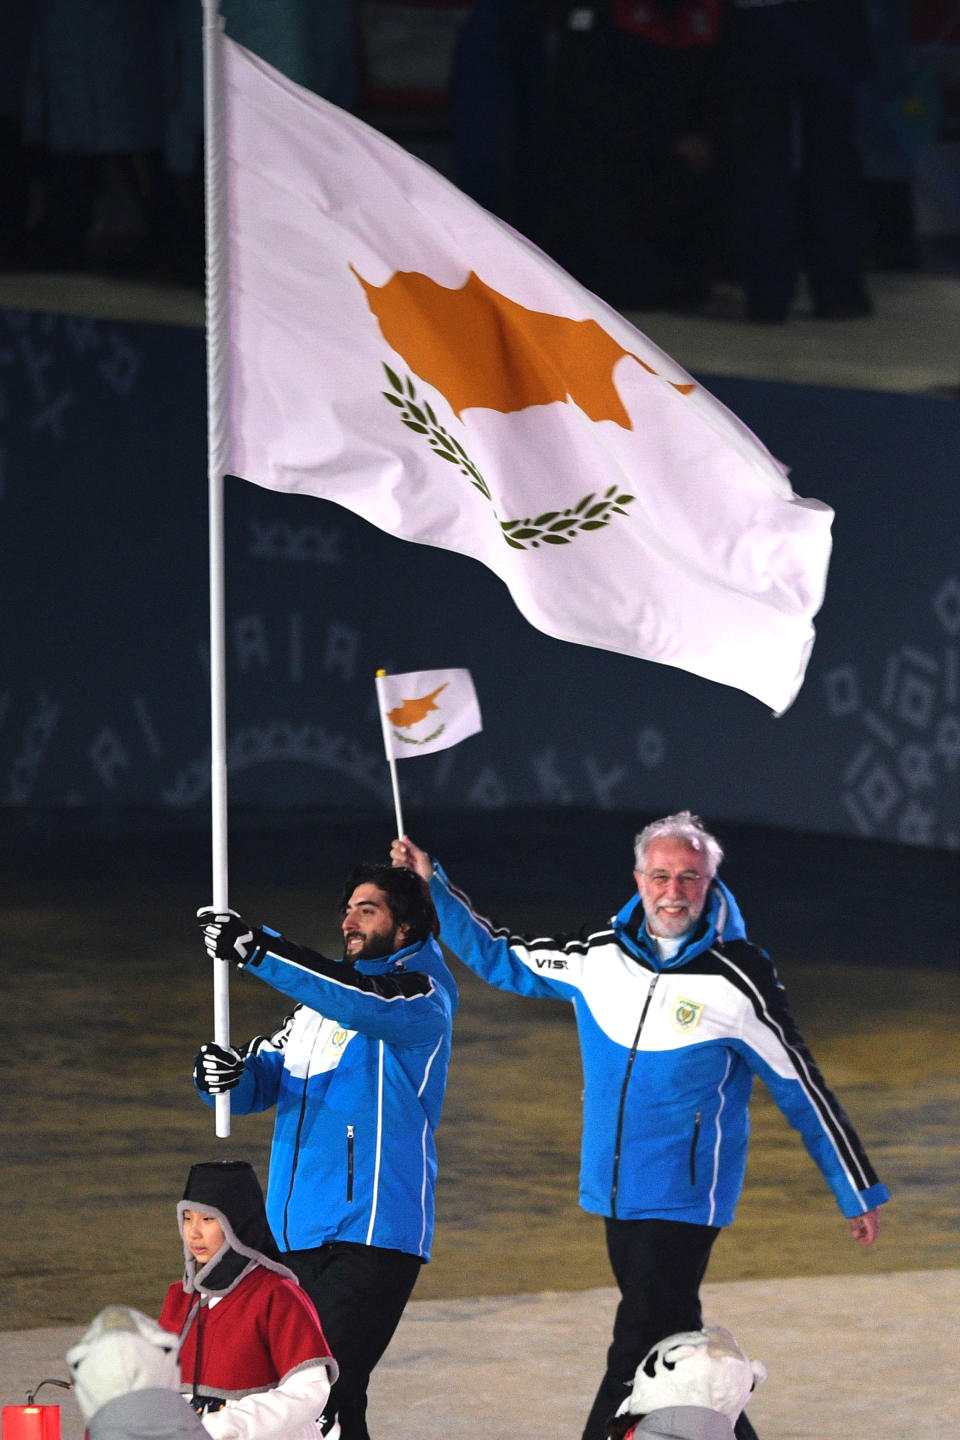 <p>Cyprus flagbearer Dinos Lefkaritis leads the delegation parade during the opening ceremony of the Pyeongchang 2018 Winter Olympic Games at the Pyeongchang Stadium on February 9, 2018. (Photo by ROBERTO SCHMIDT/AFP/Getty Images) </p>